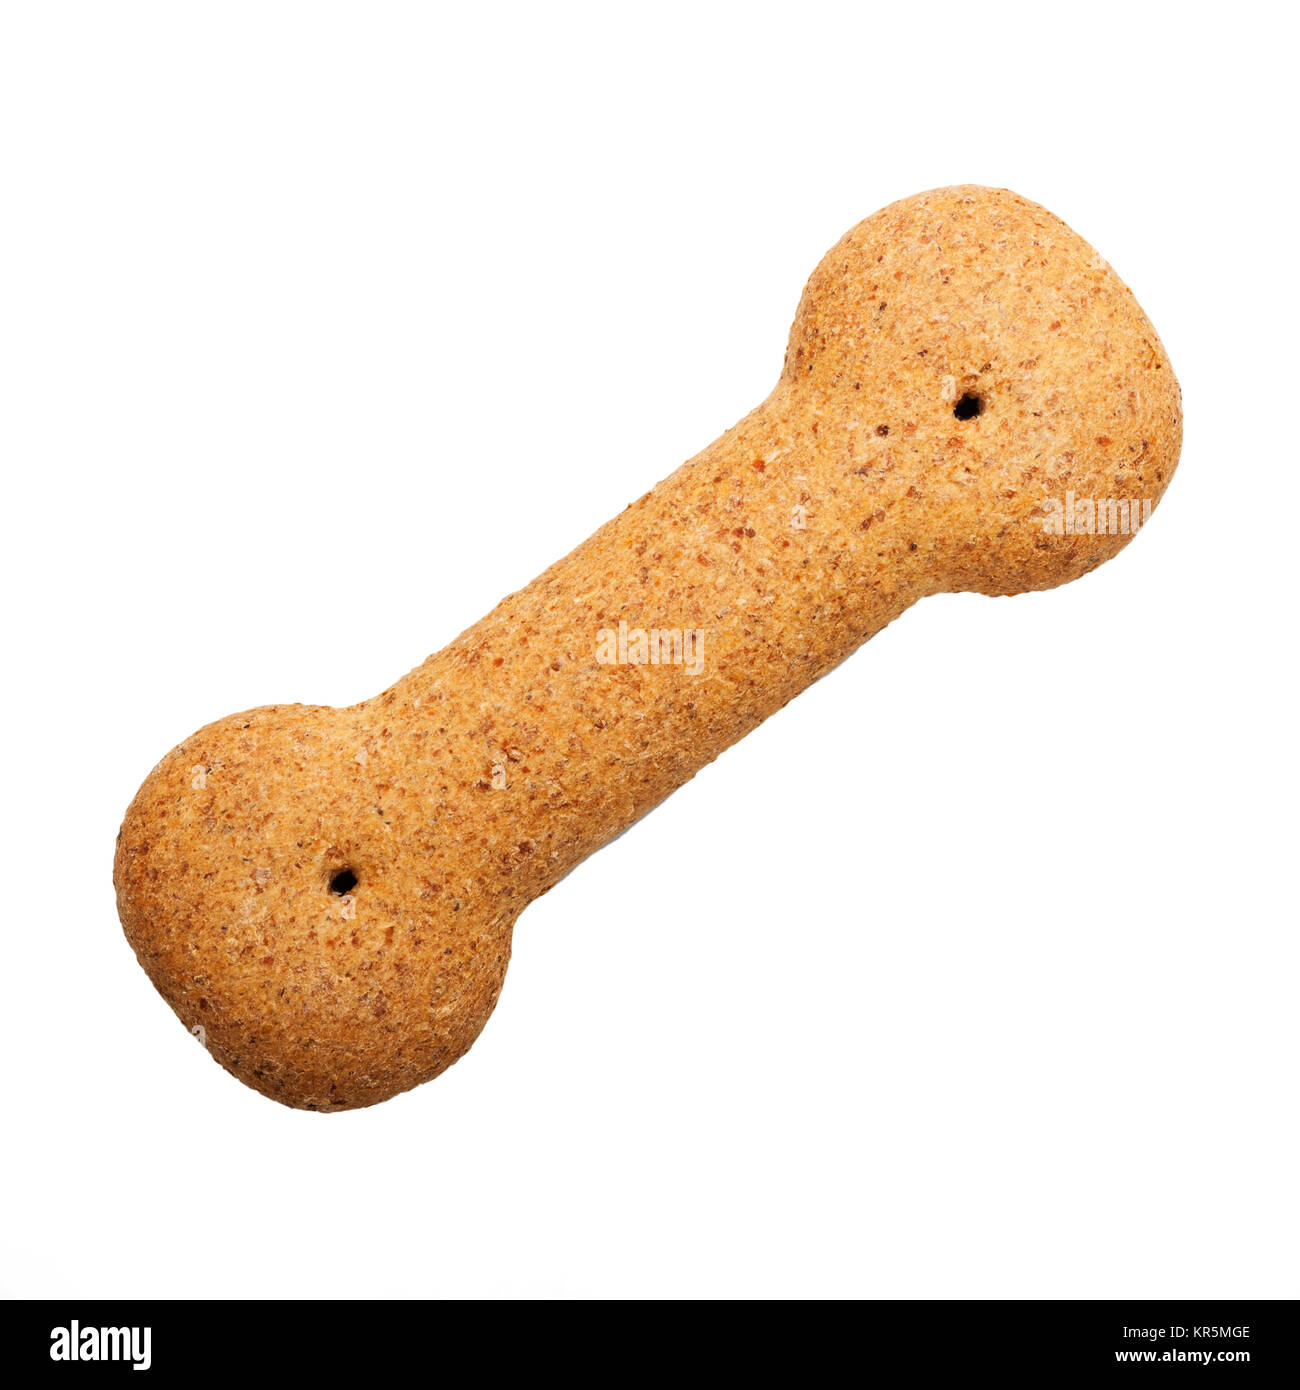 A bone shaped dog biscuit on a white background Stock Photo